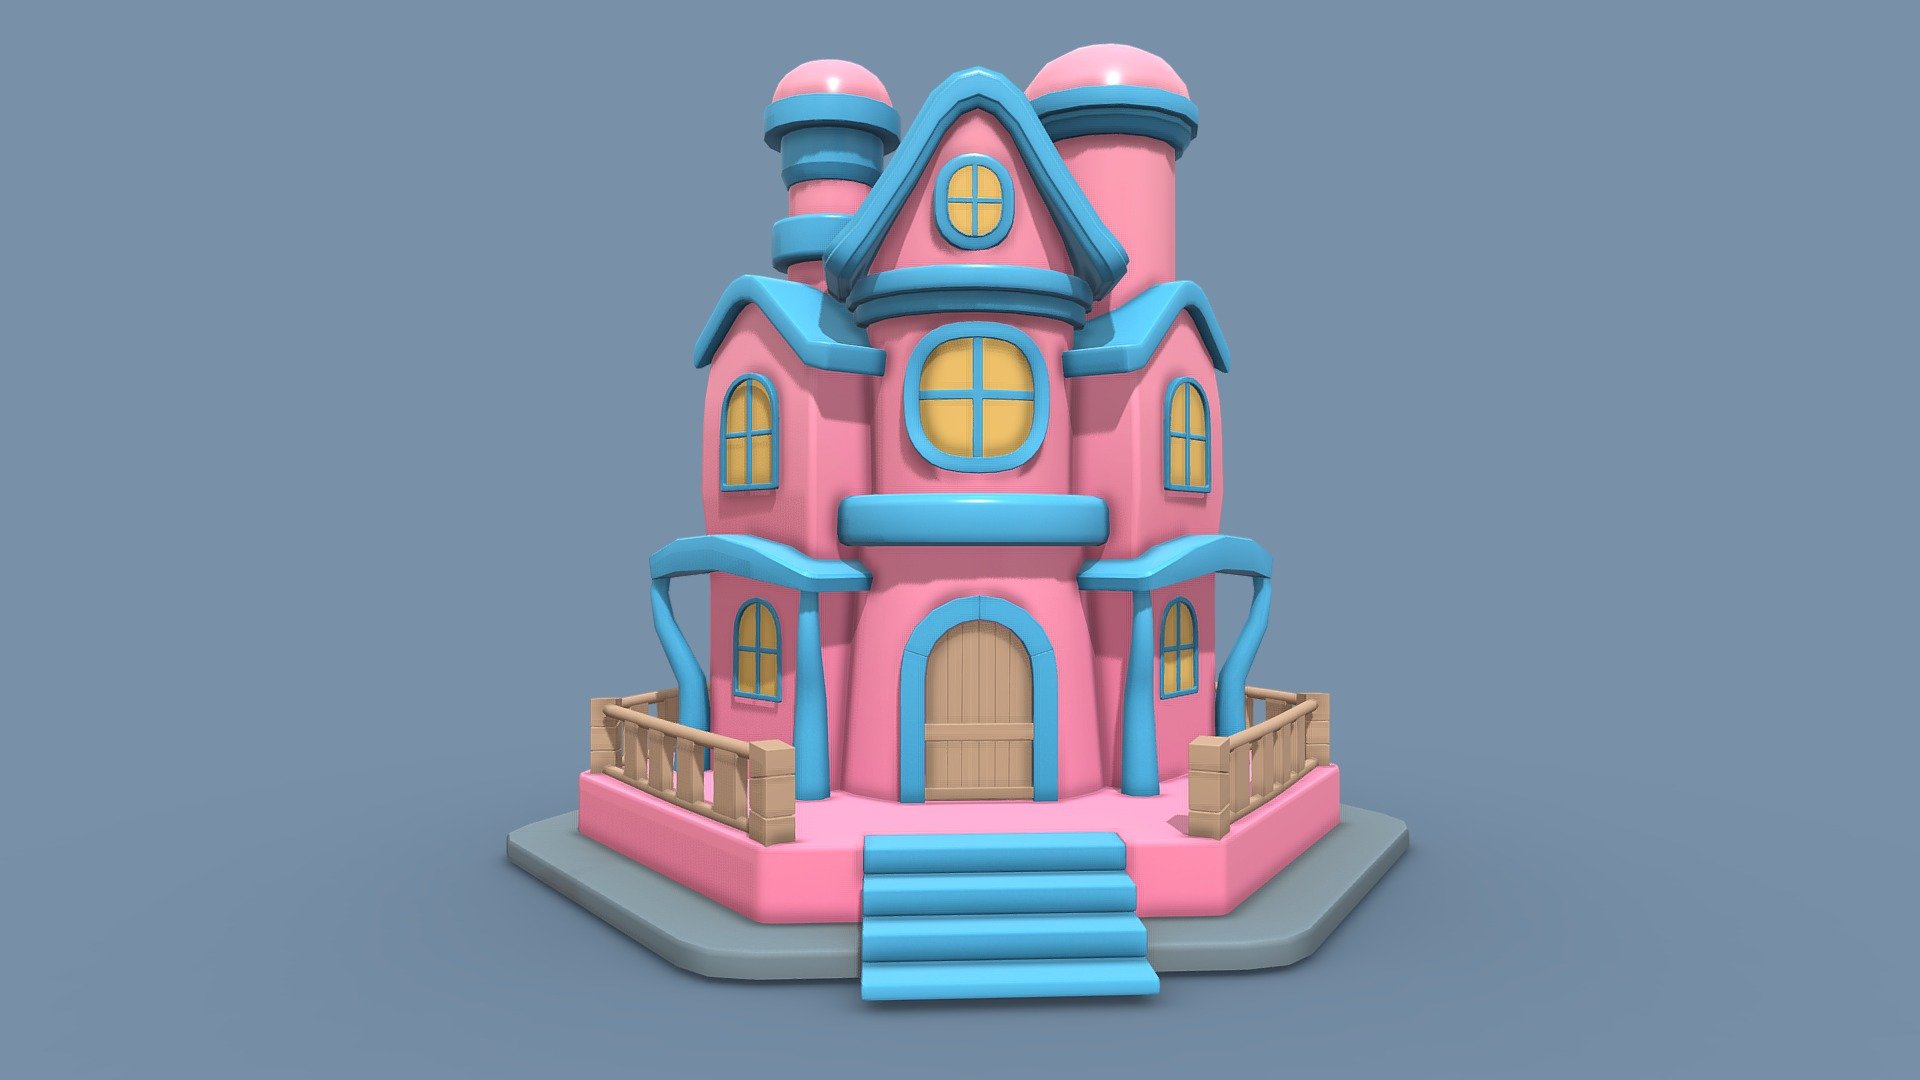 This scene features a Candy Stylized House, perfect for stylized renders!

The file consists of:




FBX file format

Textures
 - Candy Stylized House - Download Free 3D model by WillowBoxArt 3d model